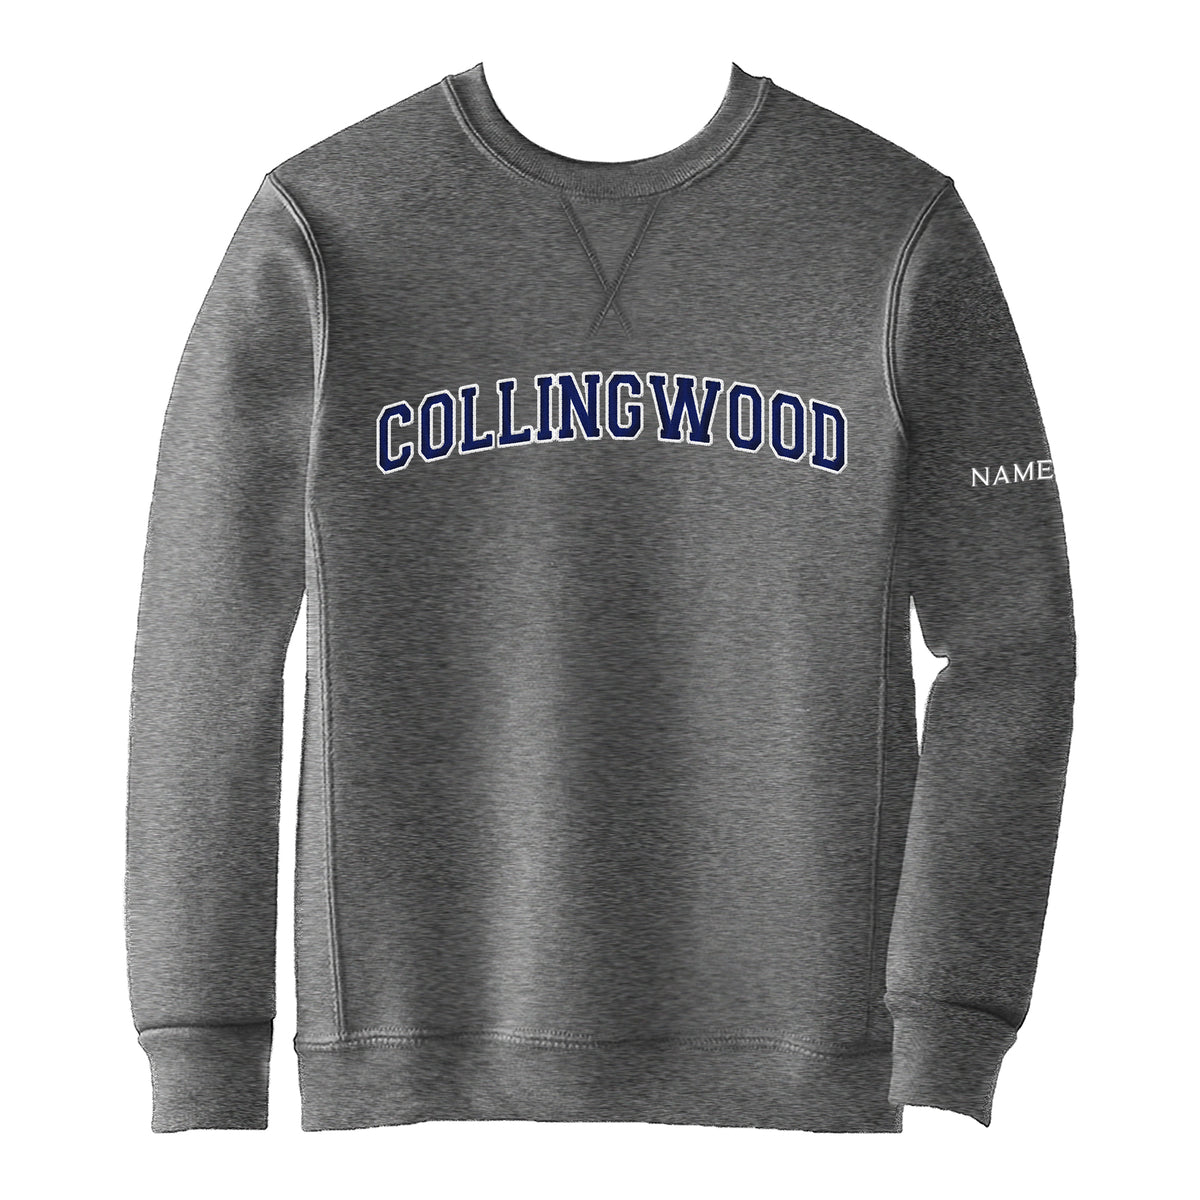 COLLINGWOOD GRADE 12 CREWNECK SWEATSHIRT WITH NAME EMBROIDERY, YOUTH *FINAL SALE*